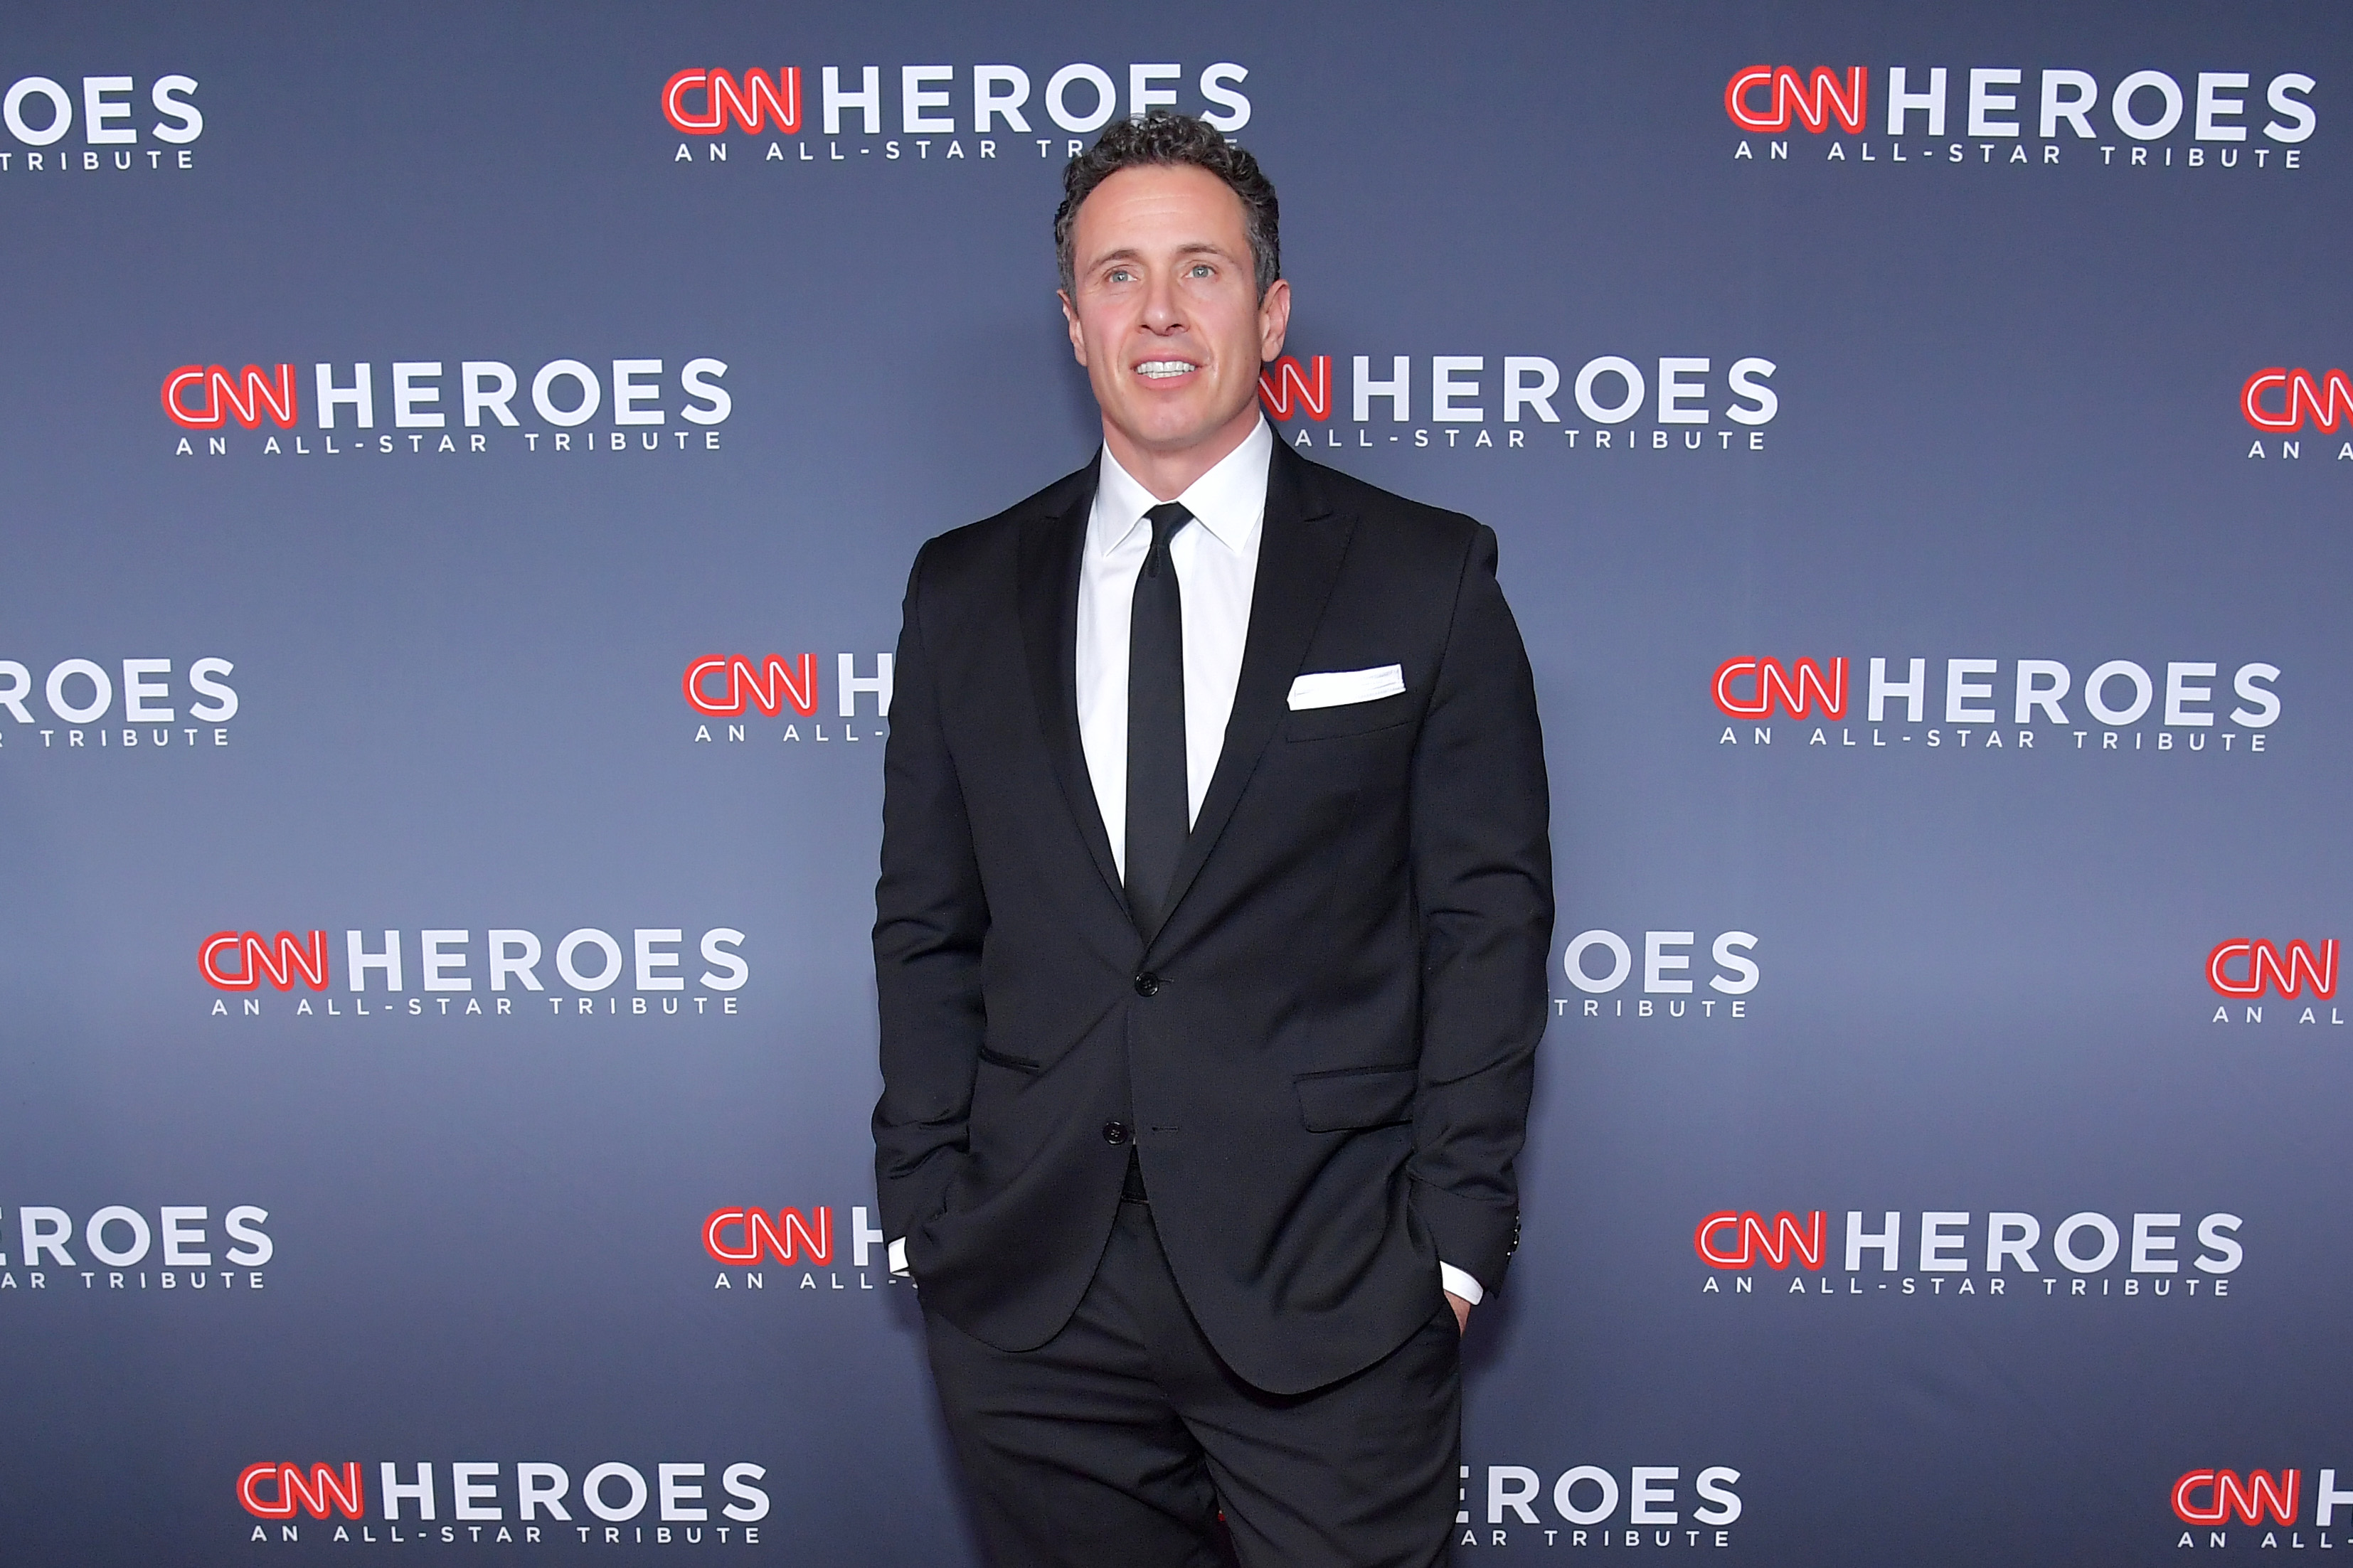 NBC’s “Meet the Press” host Chuck Todd fired back at CNN’s Chris Cuomo afte...